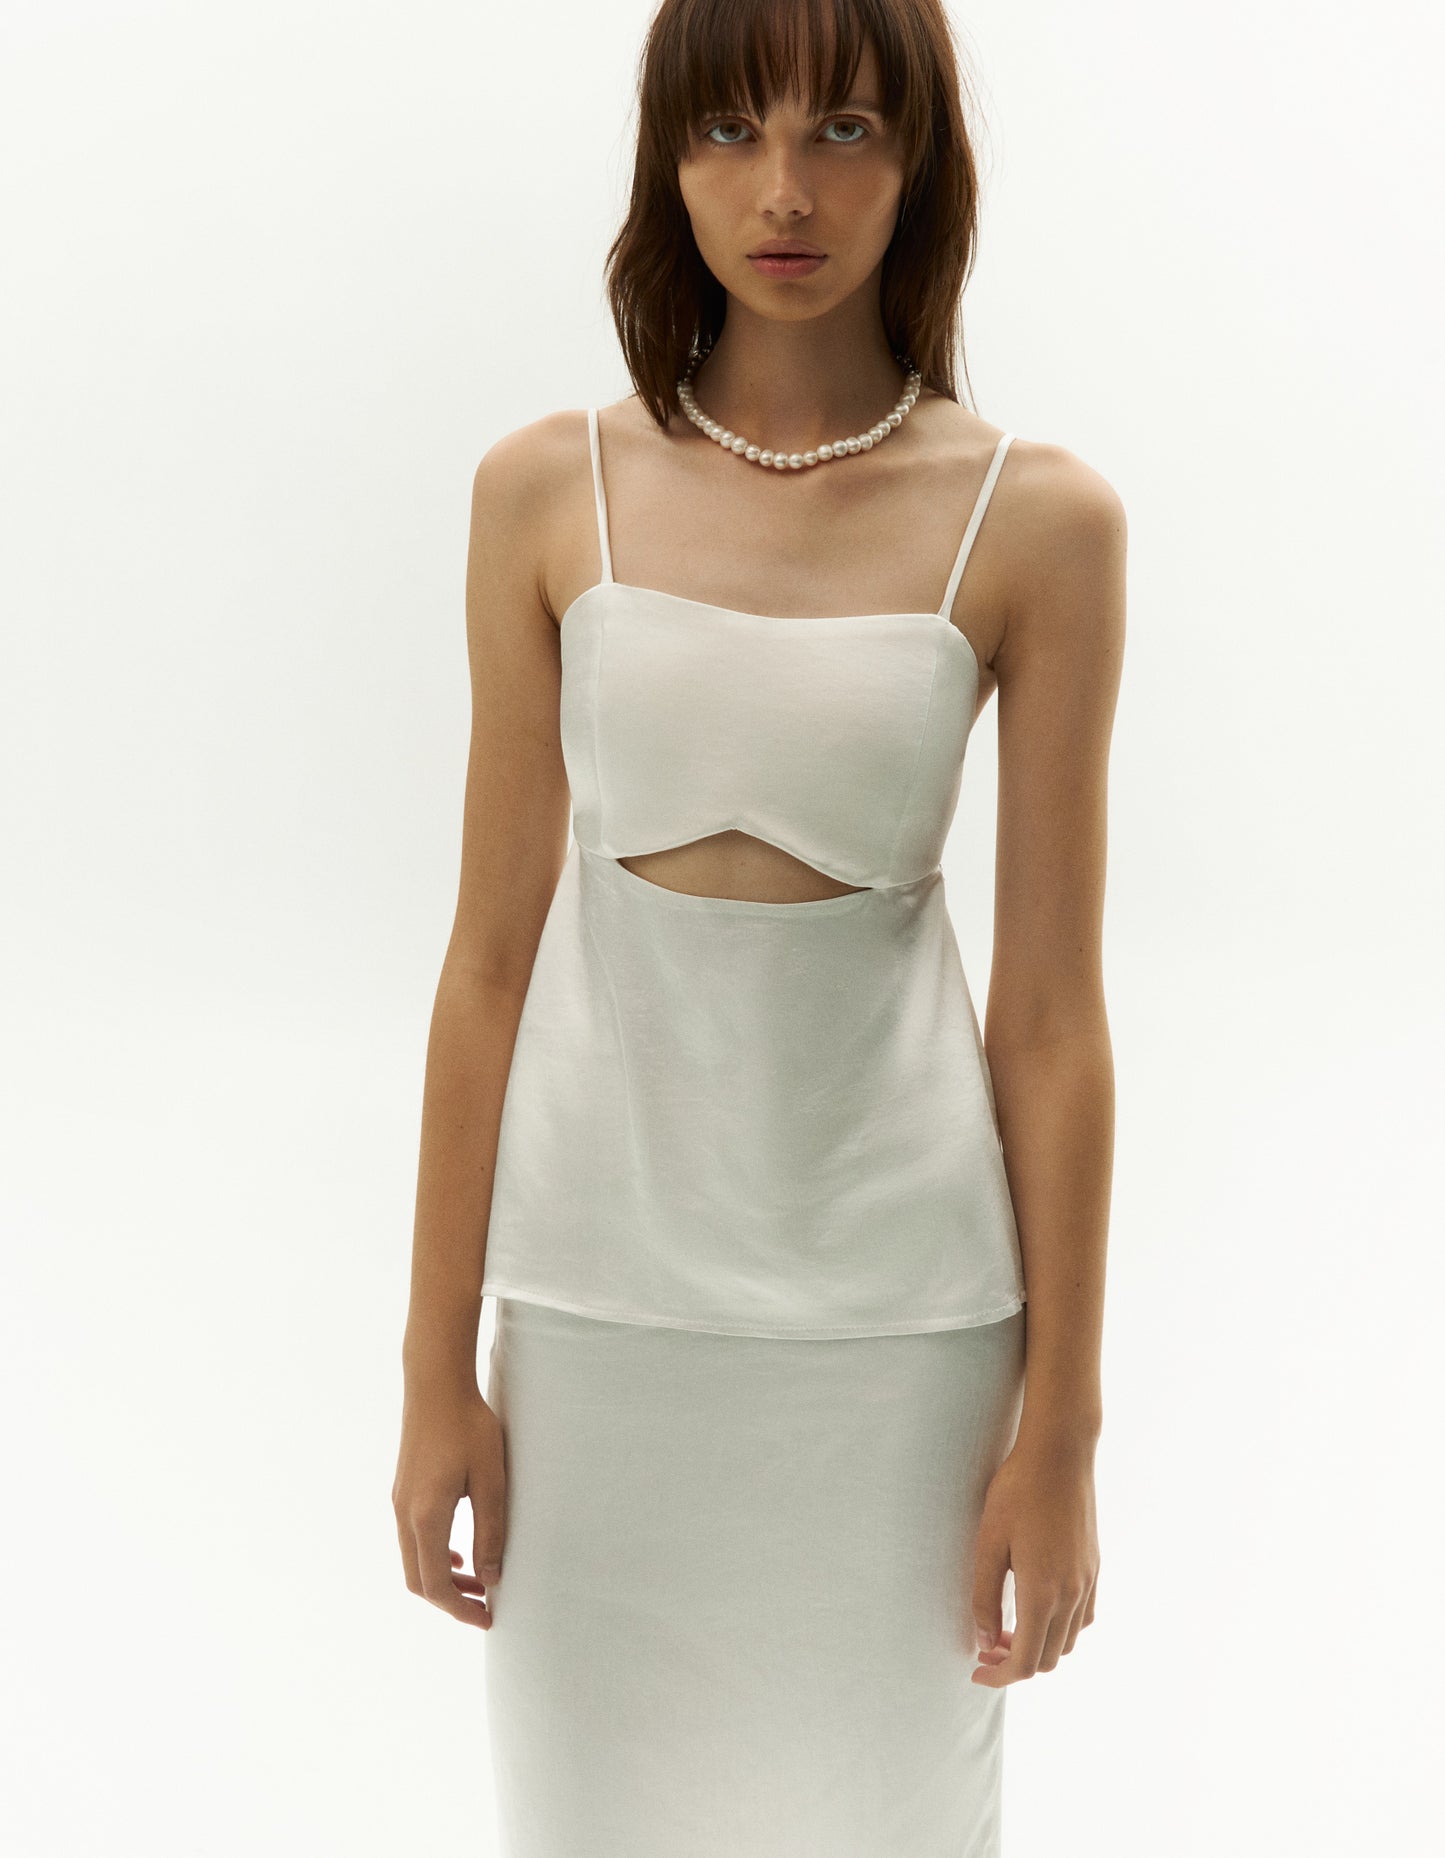 white open-back top, crafted to make a statement. This stunning piece showcases alluring front cut-out detail for a touch of contemporary flair. For a sophisticated ensemble, pair it with our satin finish long skirt, creating a chic suit-inspired look that exudes elegance. Embrace the fusion of modernity and grace with this impeccably coordinated set. Leave a lasting impression wherever you go with this fashion-forward combination.